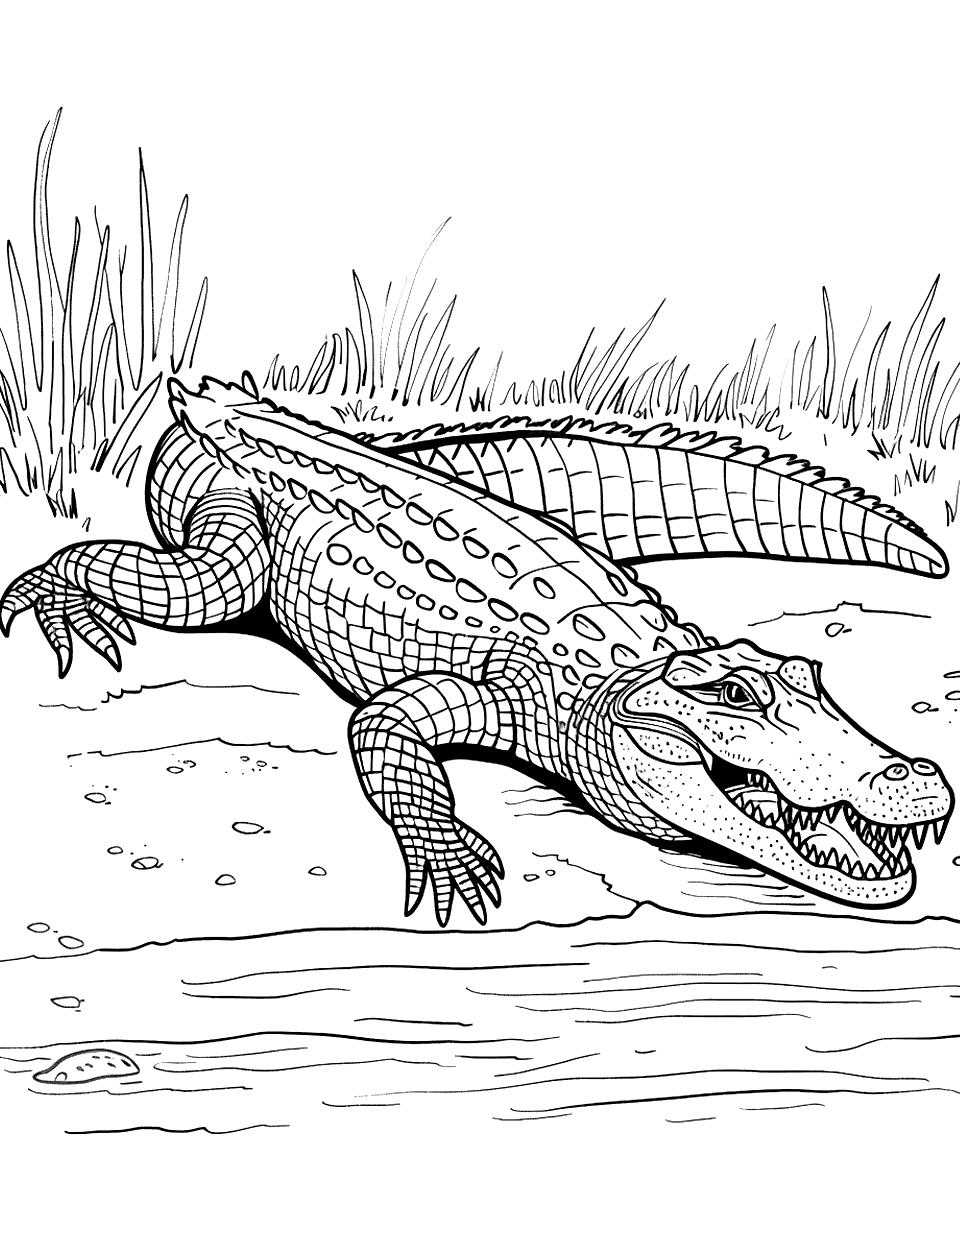 American Crocodile on the Shore Coloring Page - An American crocodile resting on the riverbank.